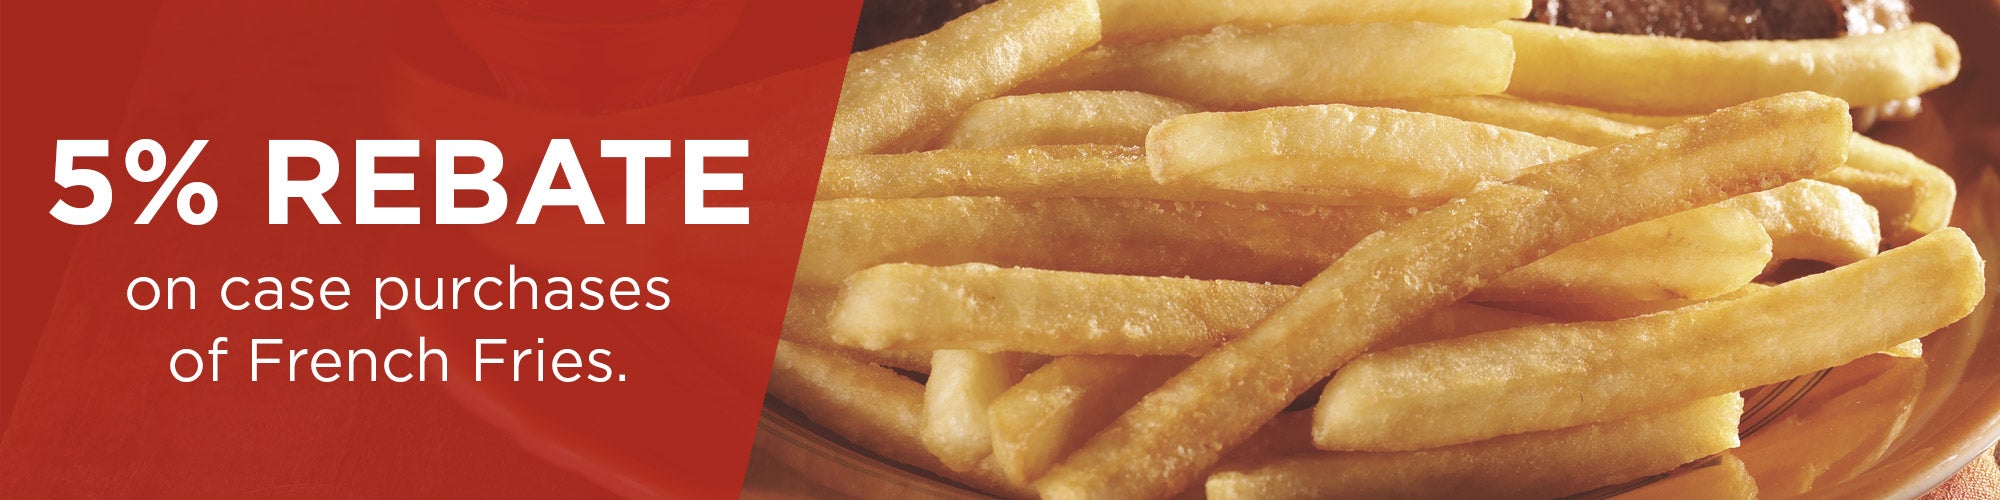 5% Rebate on case purchases of french fries